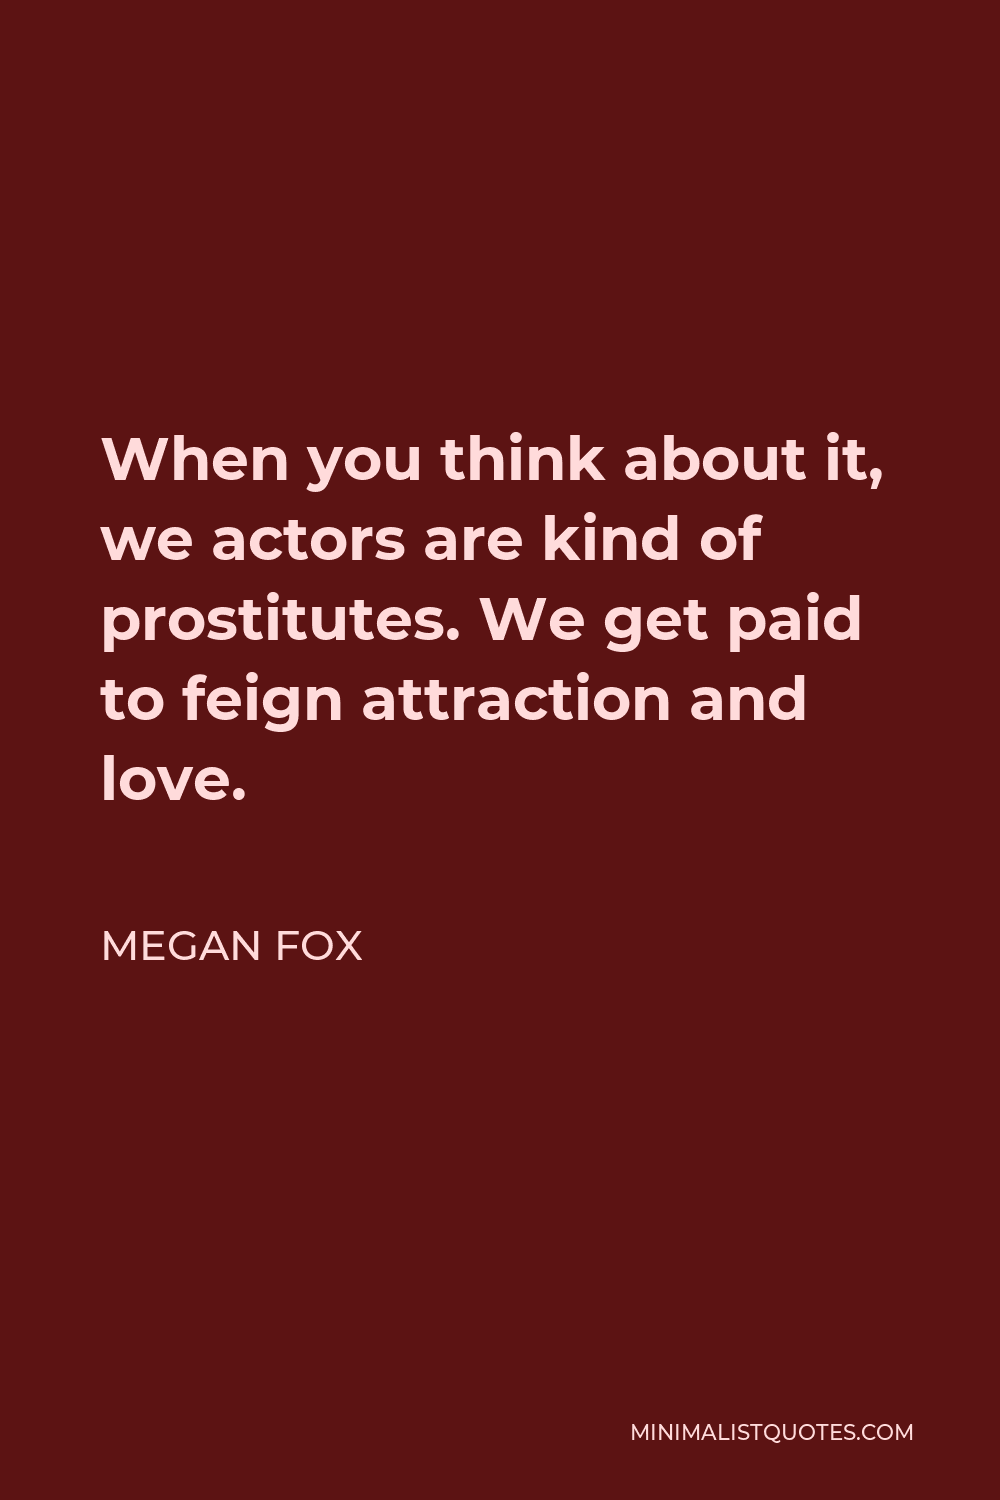 Megan Fox Quote - When you think about it, we actors are kind of prostitutes. We get paid to feign attraction and love.